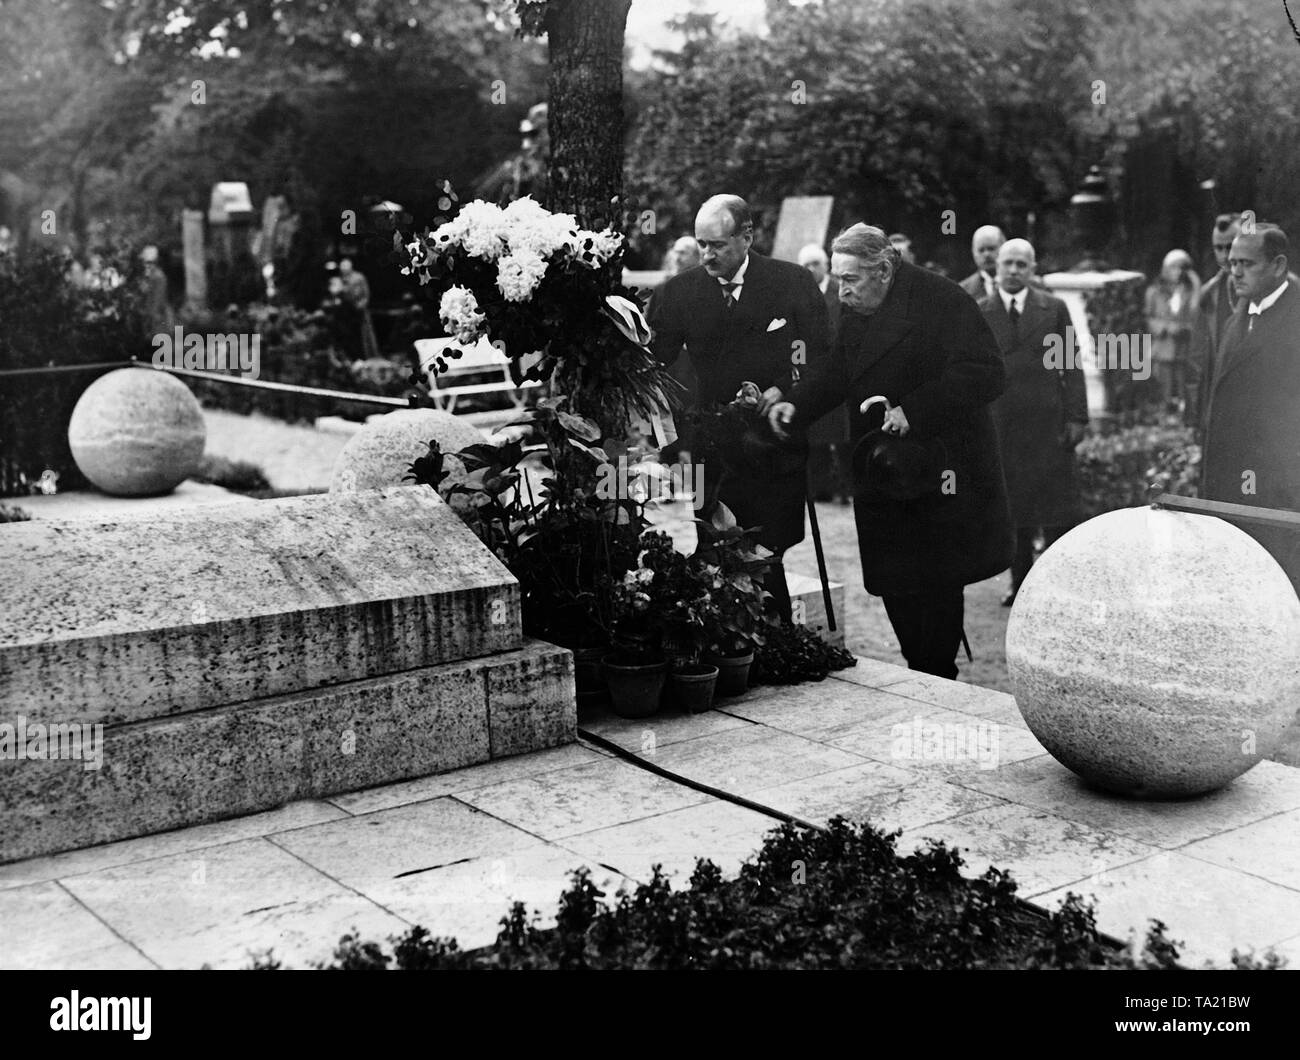 During the visit of a French government delegation in Berlin, the French Foreign Minister Aristide Briand and the French Ambassador in Berlin Henri-Francois Poncet visit the grave of Foreign Minister Gustav Stresemann in the Luisenstaedtischer cemetery. Stock Photo